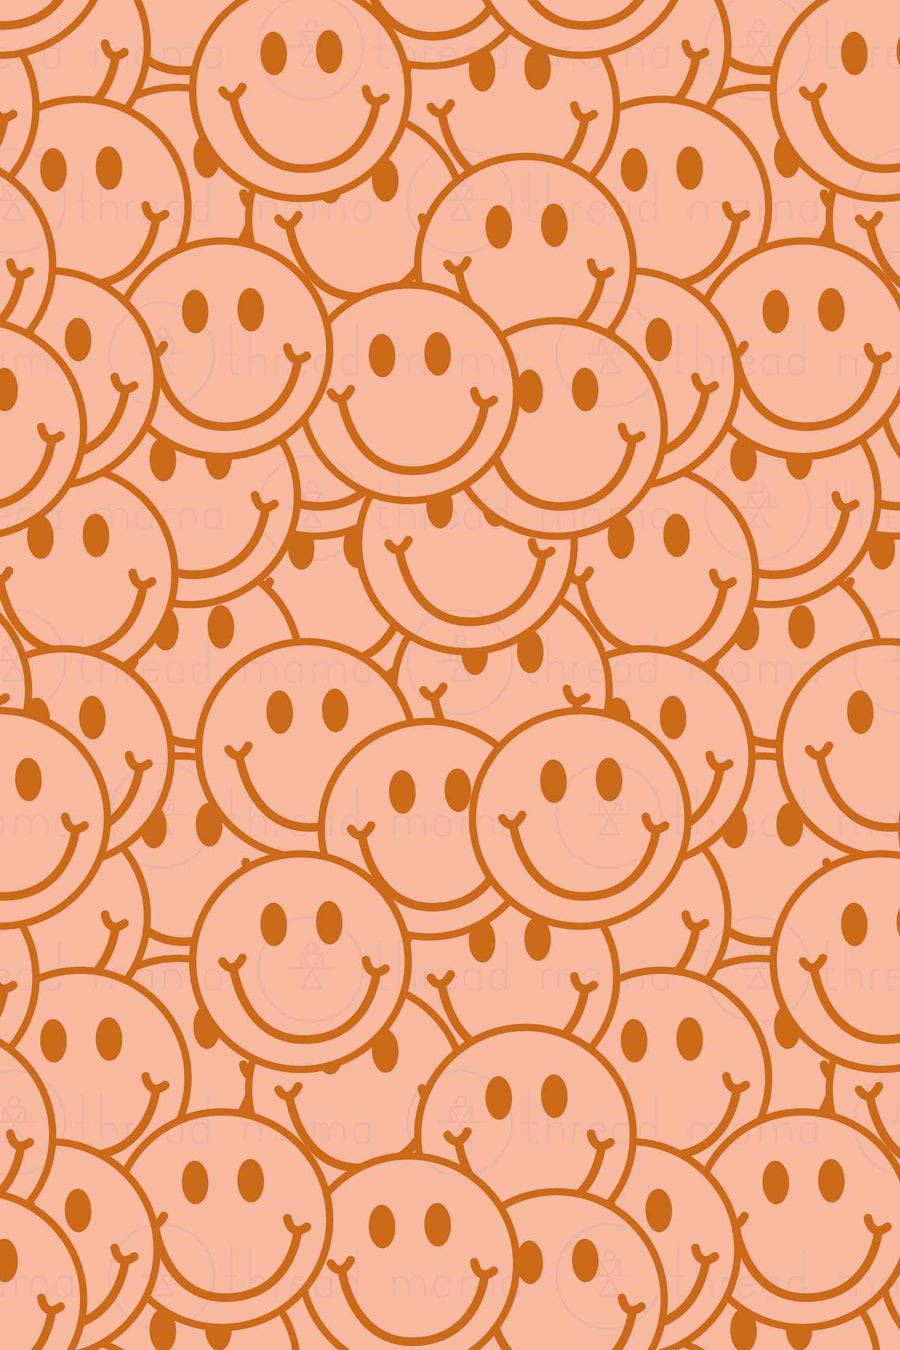 Smiley Cluster Collection (Background Patterns)